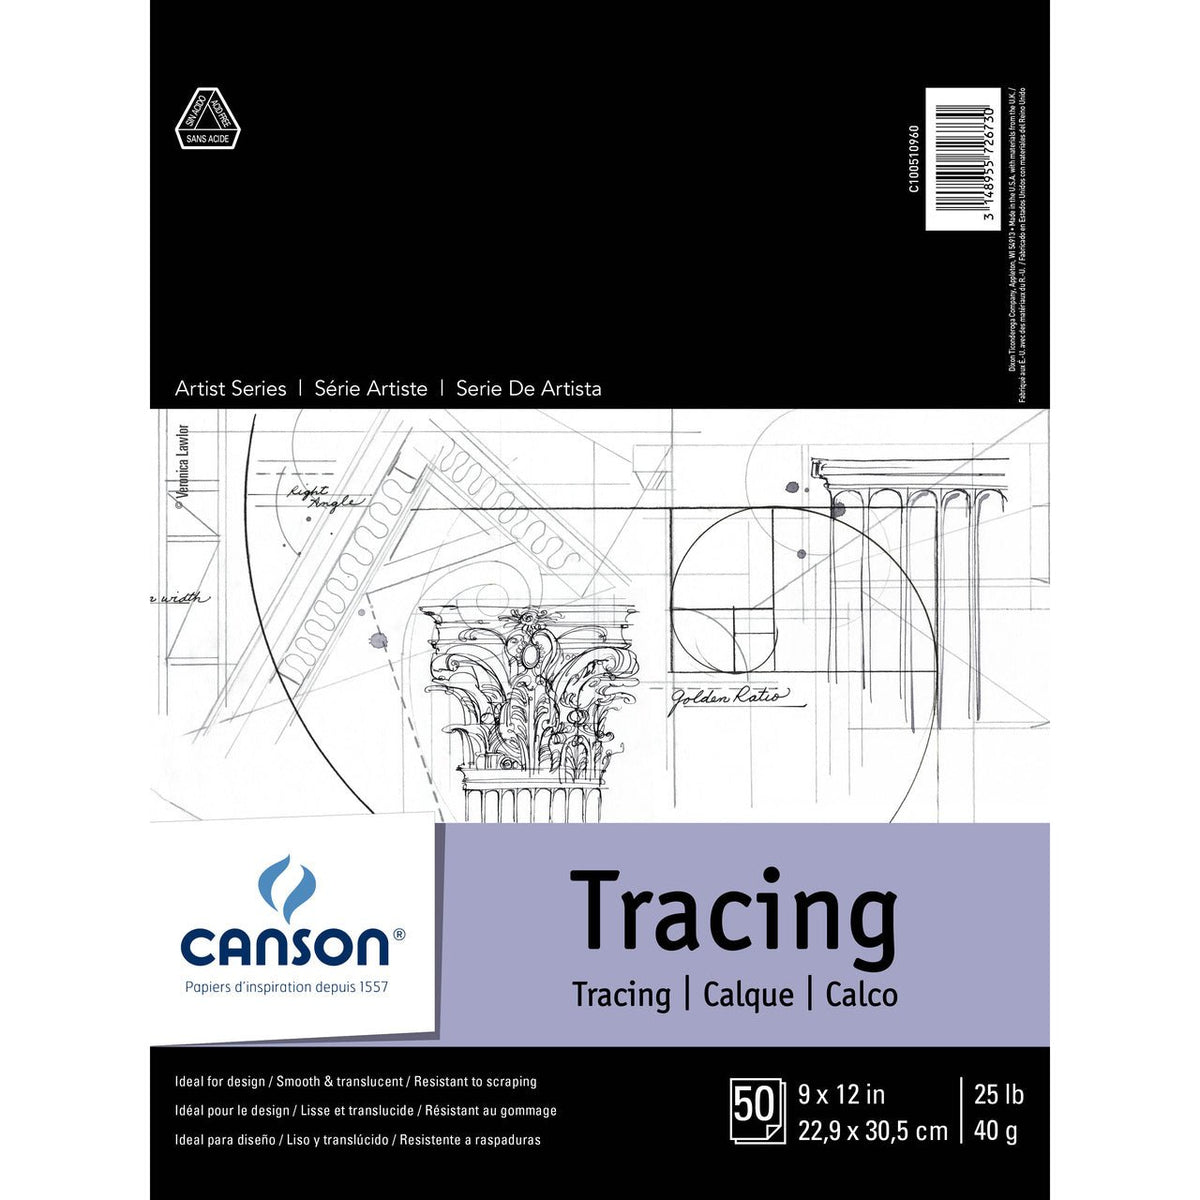 Canson Tracing Pad 9 in. x 12 in.